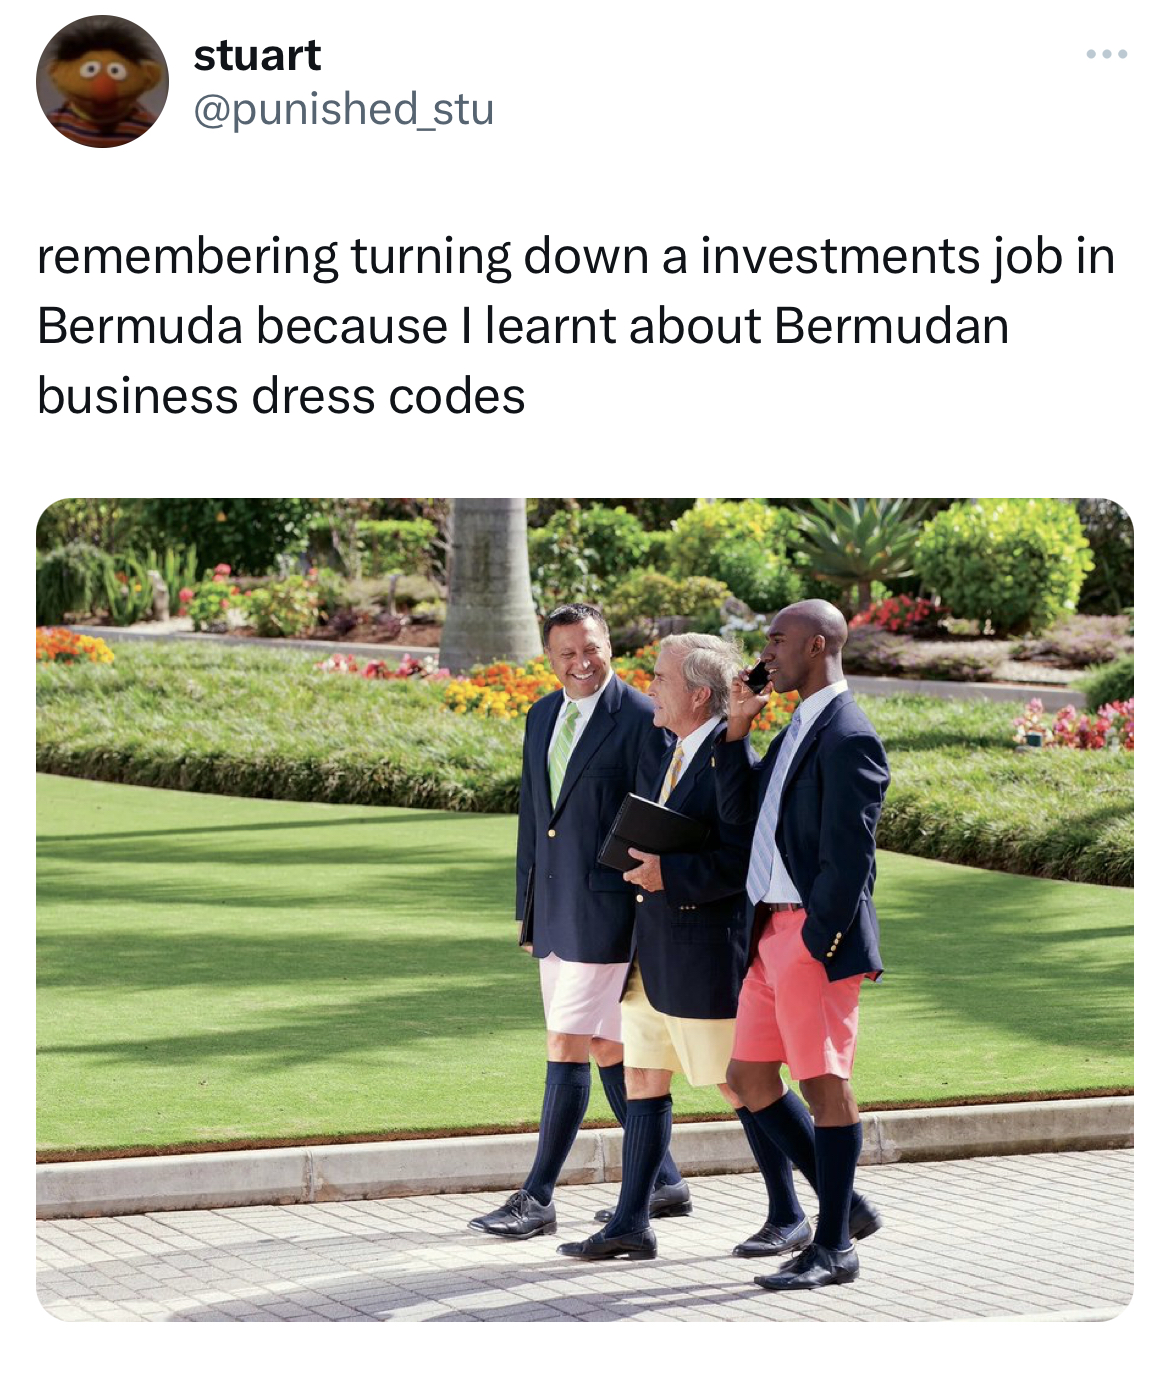 savage tweets - seaton park aberdeen - stuart remembering turning down a investments job in Bermuda because I learnt about Bermudan business dress codes